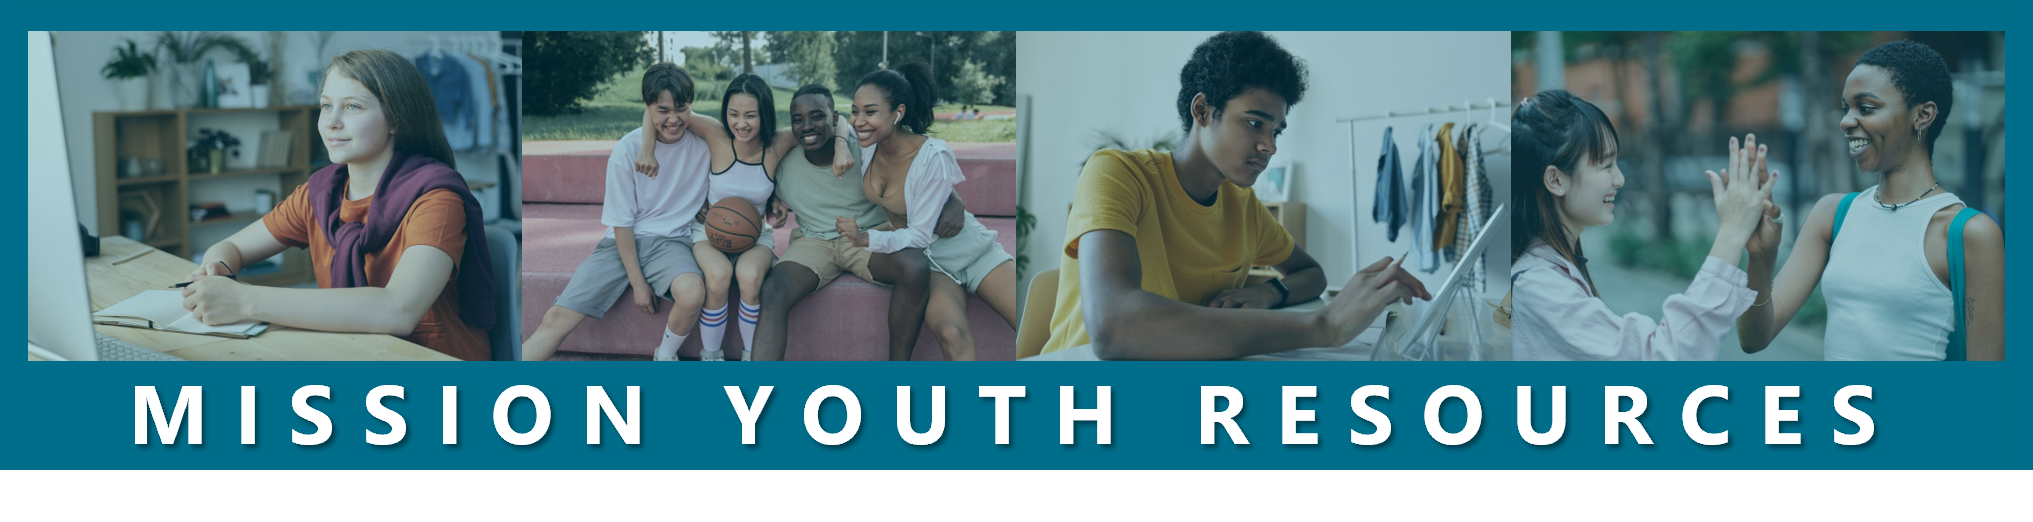 Mission Youth Resources